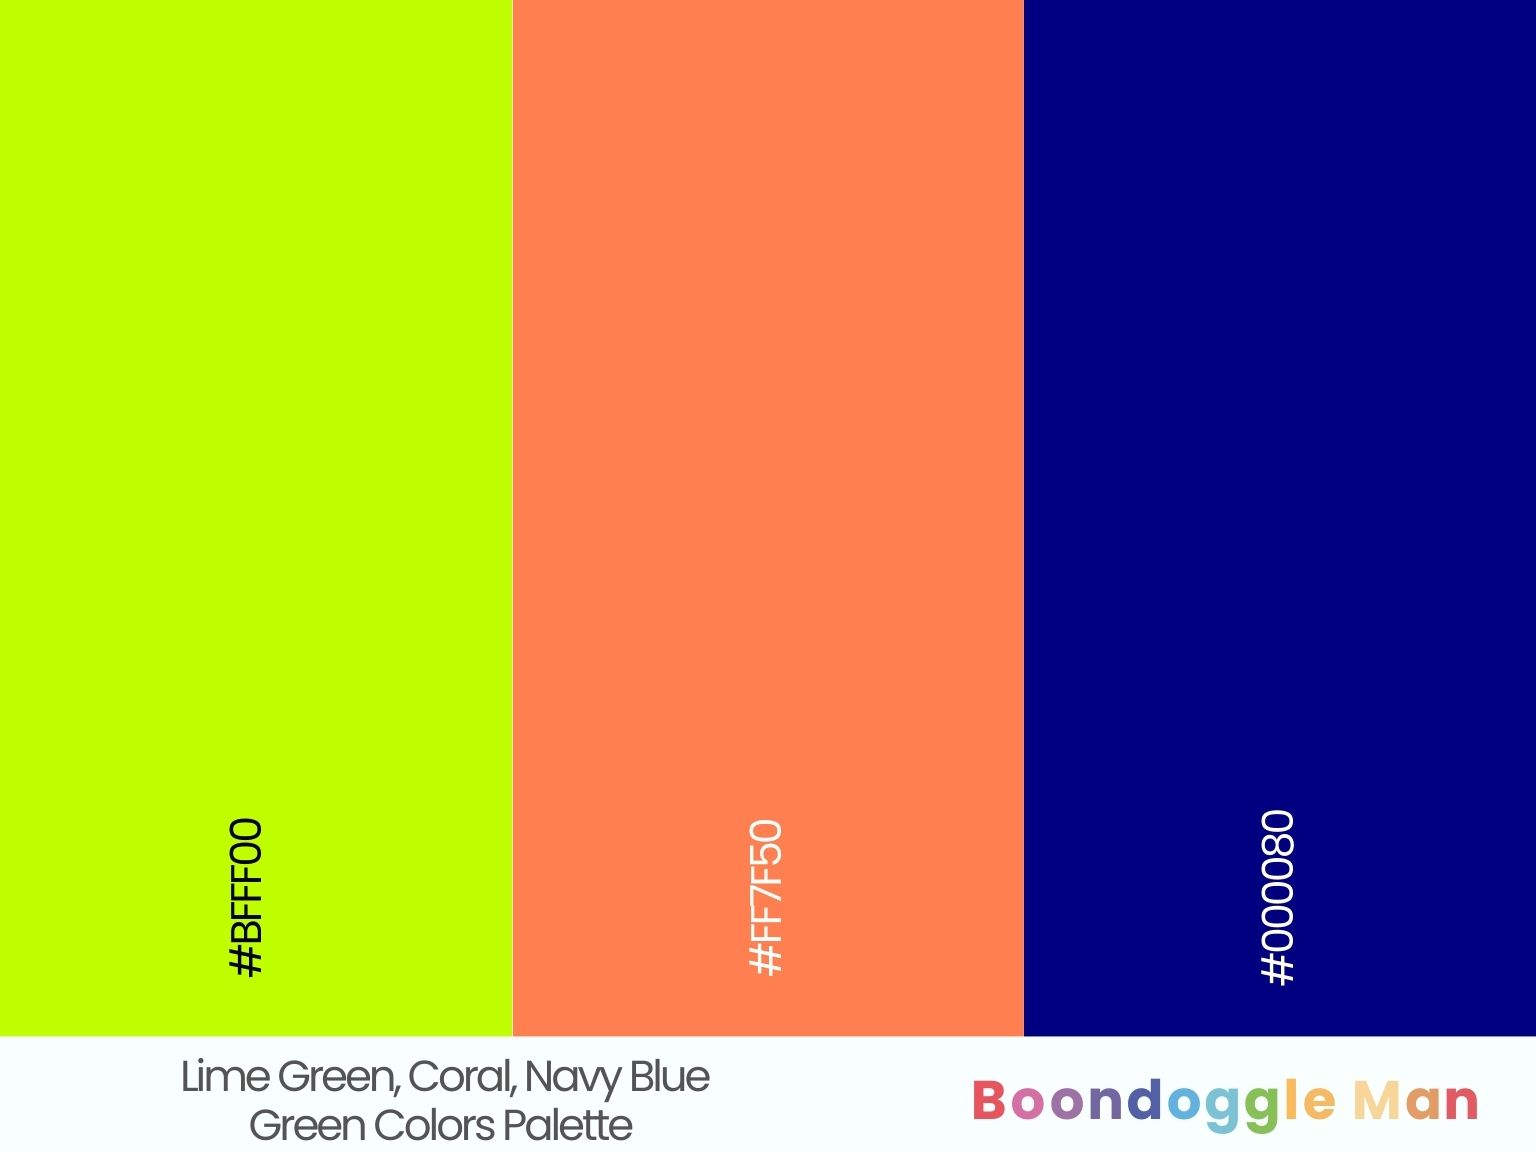 Lime Green, Coral, Navy Blue